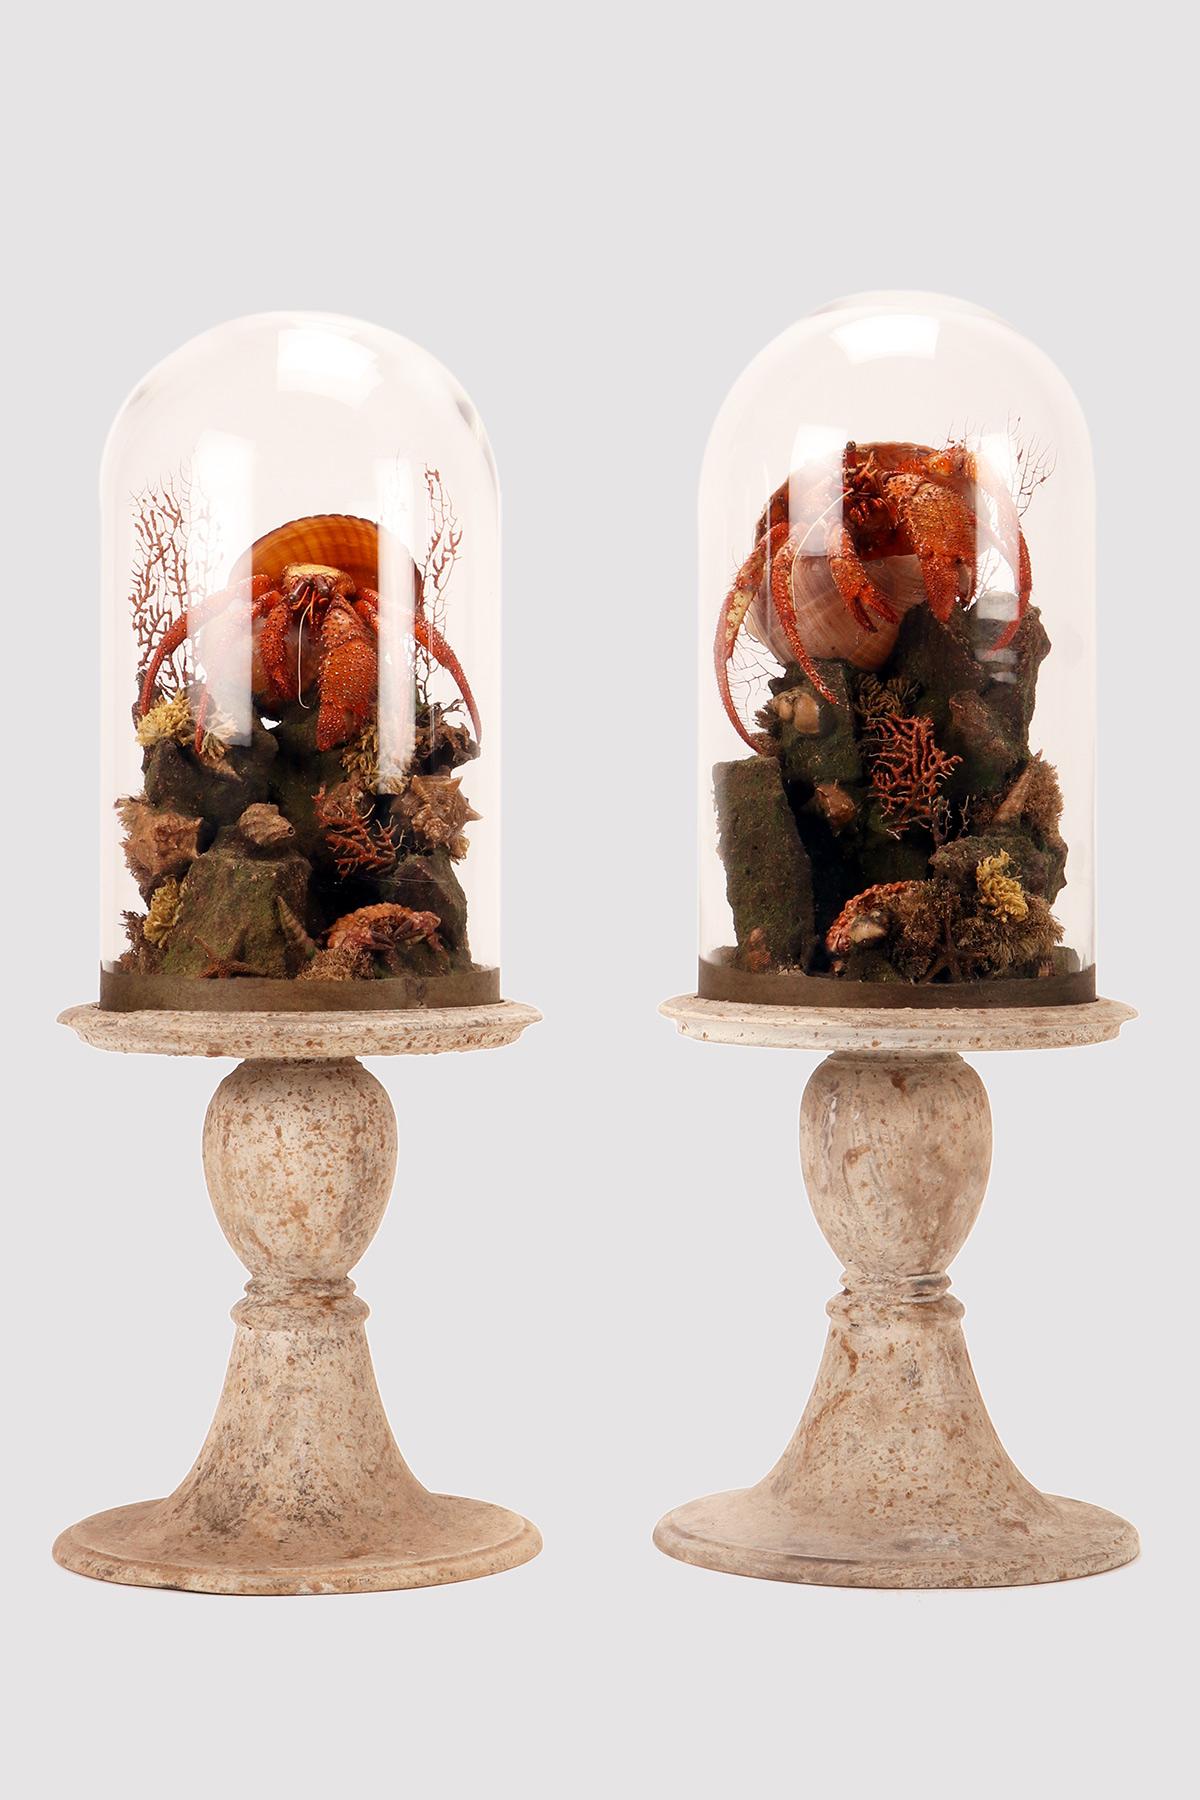 A natural Wunderkammer specimen a pair of marine diorama with Hermit Crab (Pagurus Bernhardus) a brunch, fan shaped of Horny coral, reef, shells. The Specimens are mounted inside a glass dome, over a gray painted wooden base. Italy circa1870. (Also